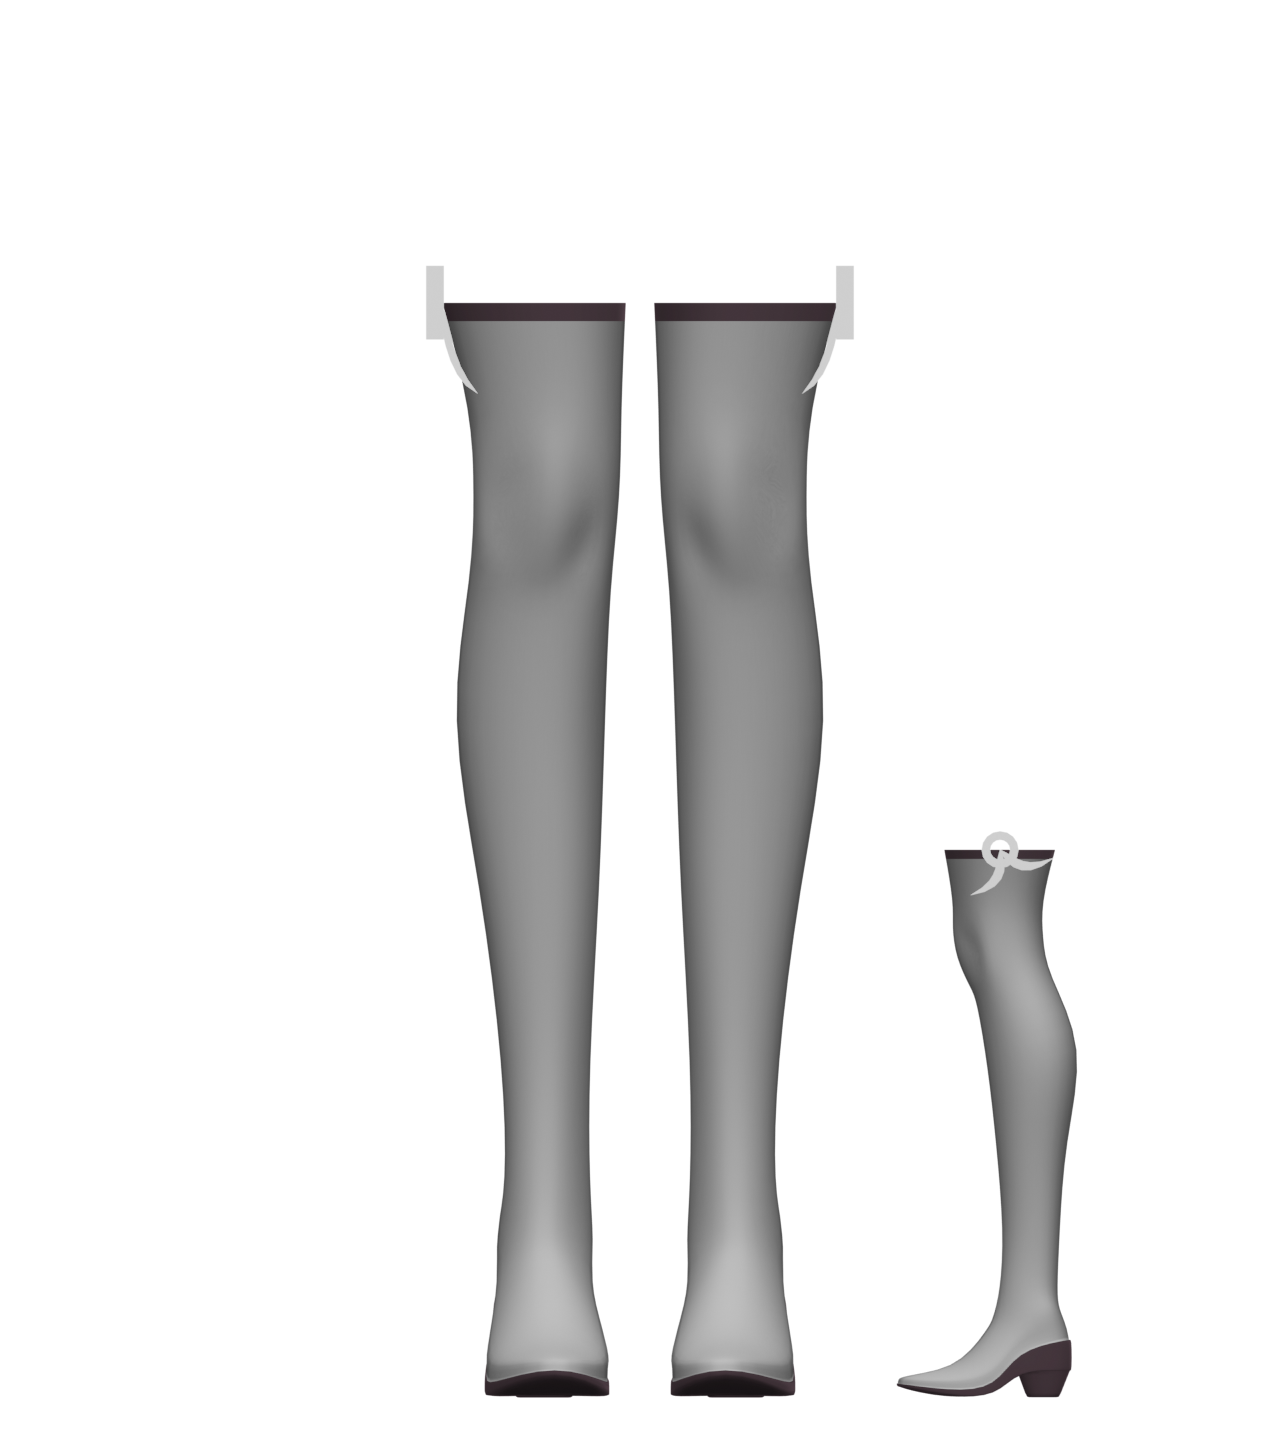 MMD - Cass Boots by Sy-Jei-Vee on DeviantArt